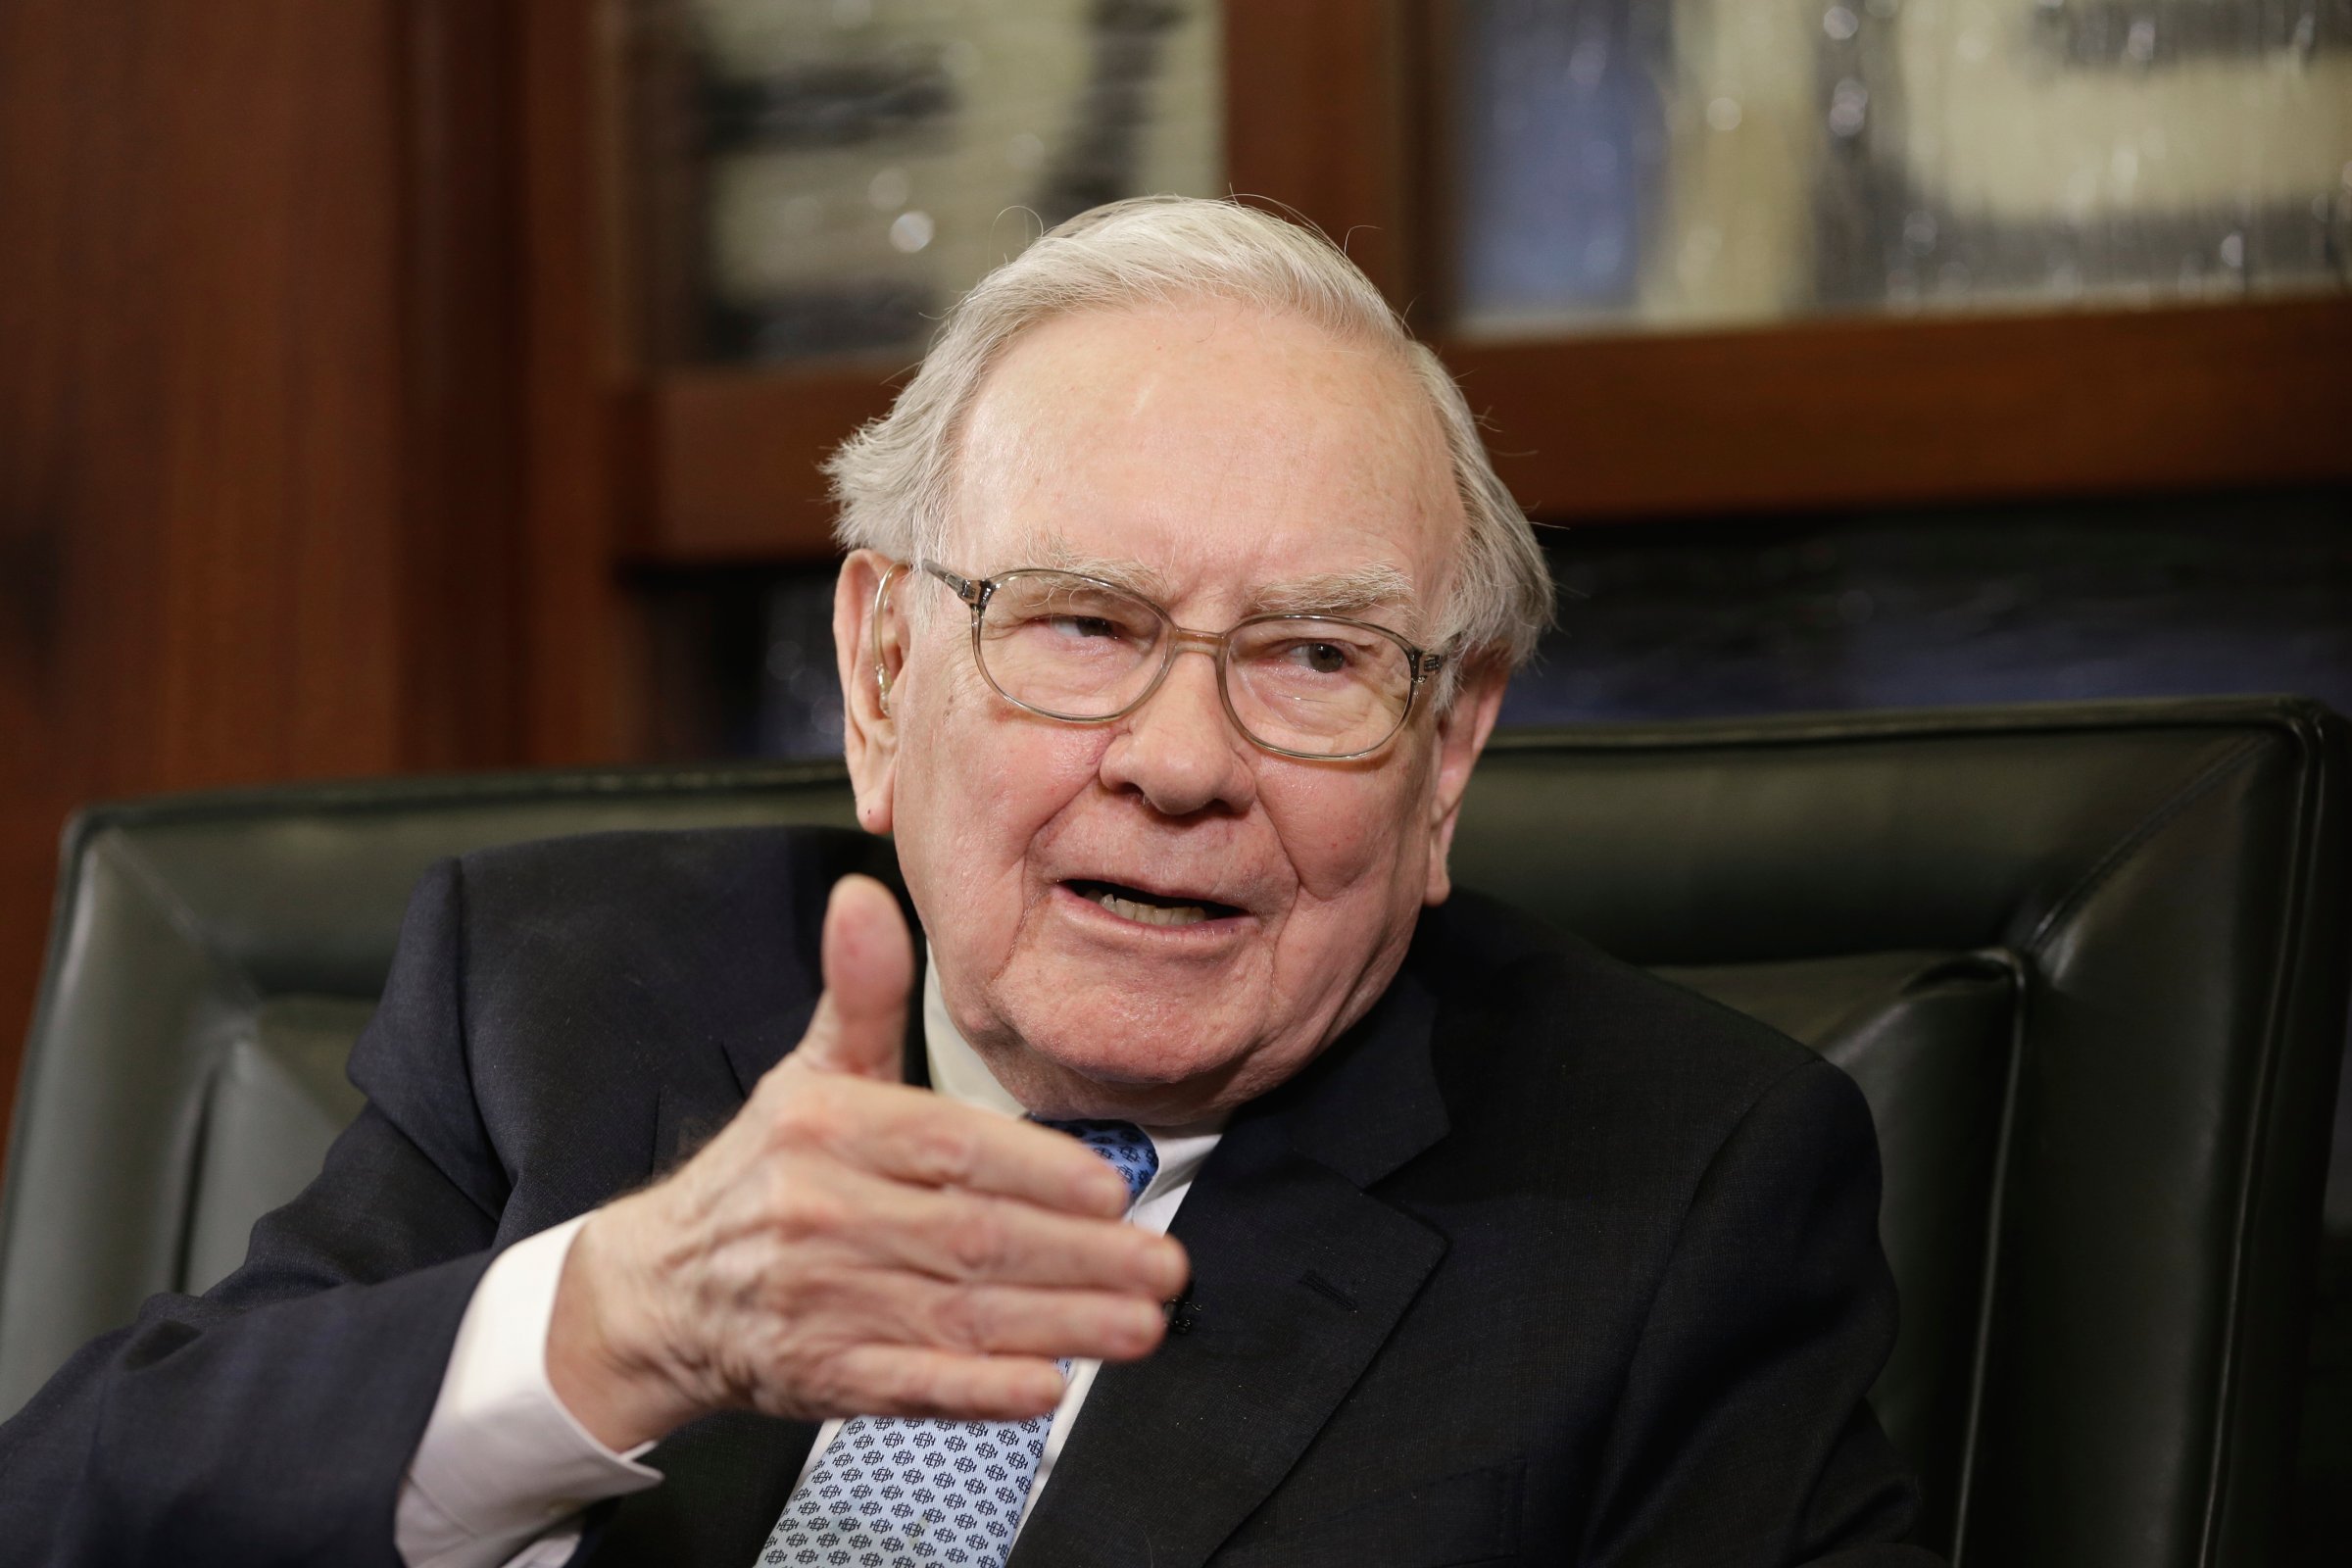 Berkshire Hathaway Chairman and CEO Warren Buffett during an interview with Liz Claman in Omaha, Neb. on May 5, 2014.